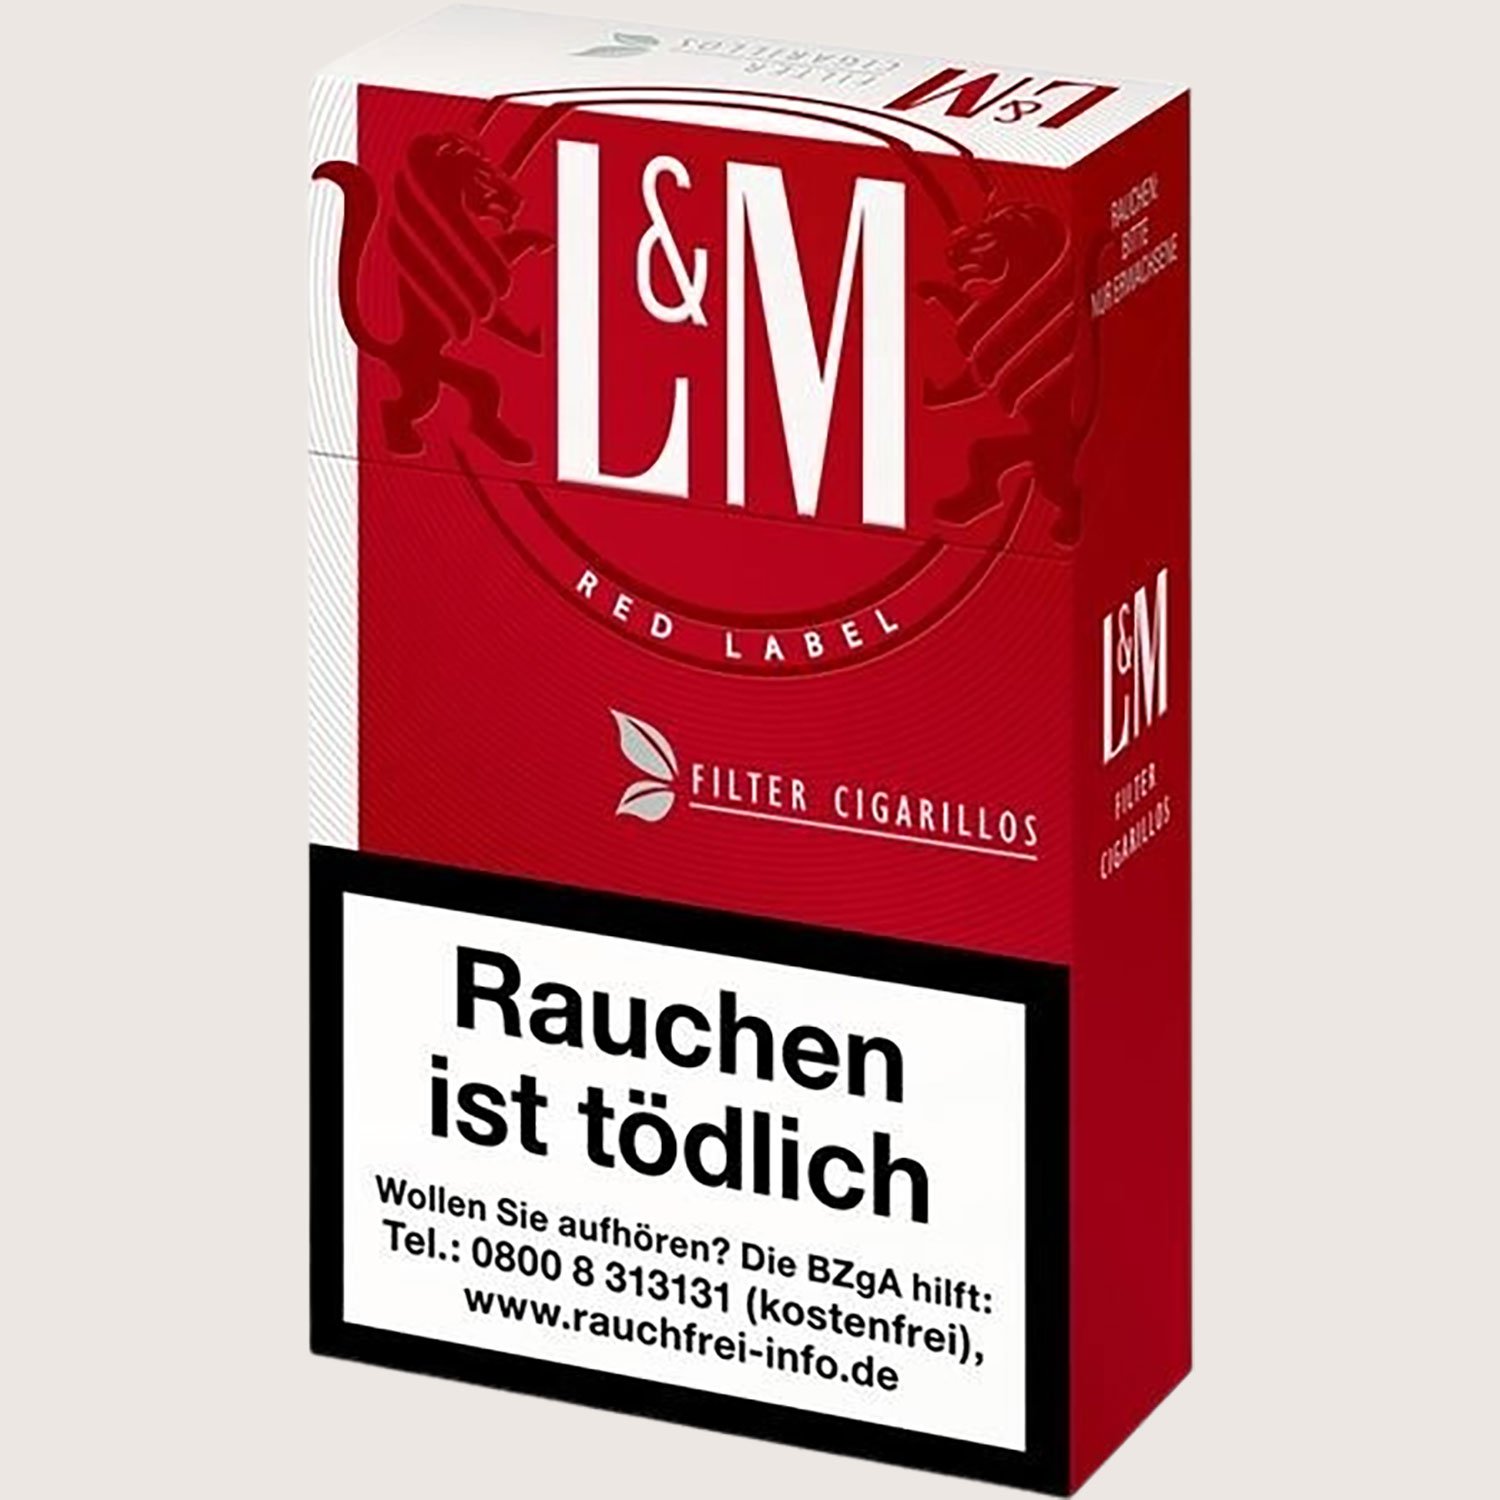 L&M Red Label Filter Cigarillos